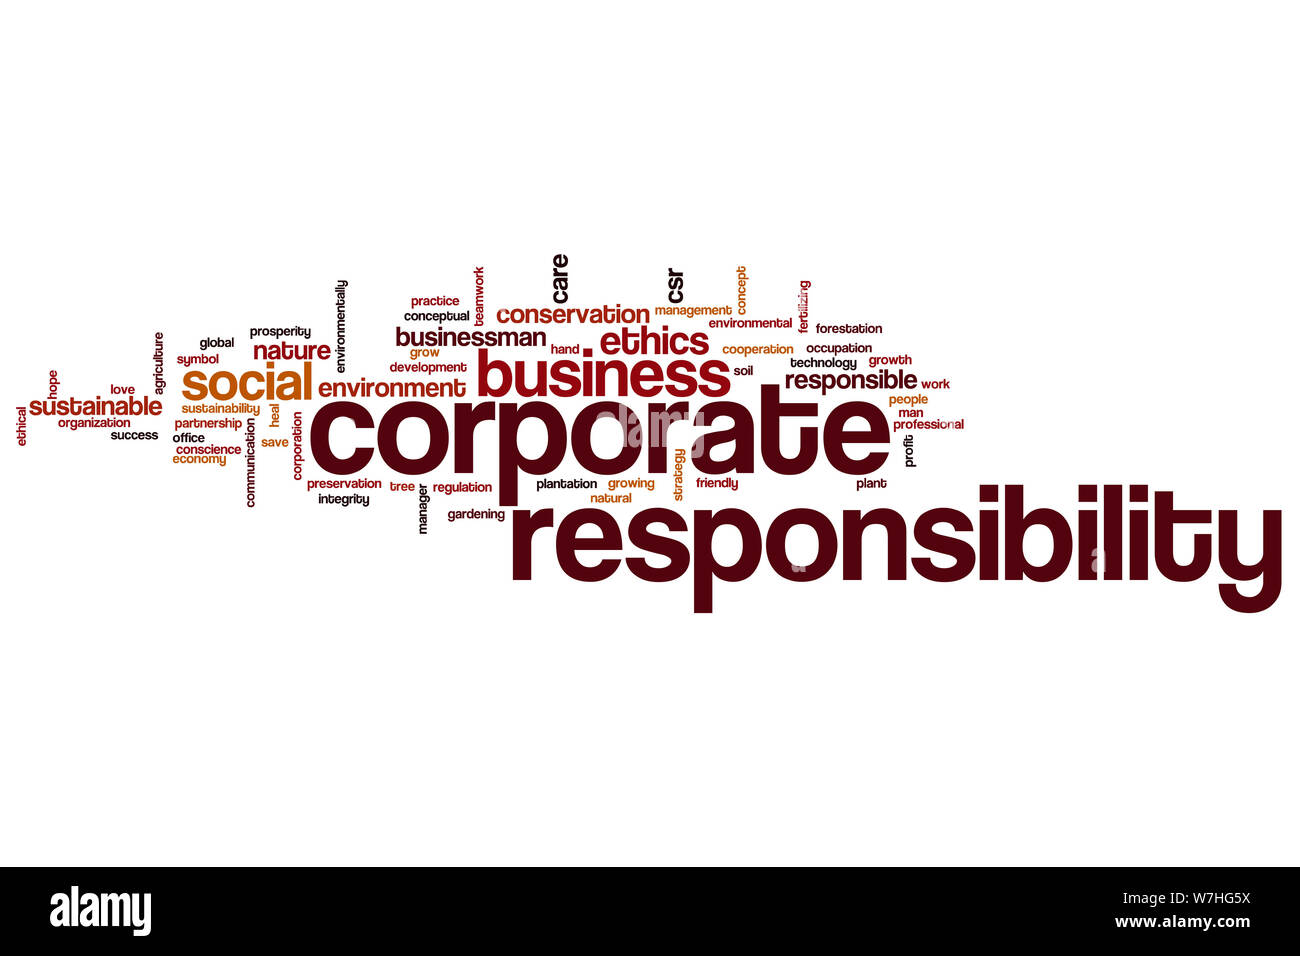 Corporate responsibility word cloud concept Stock Photo